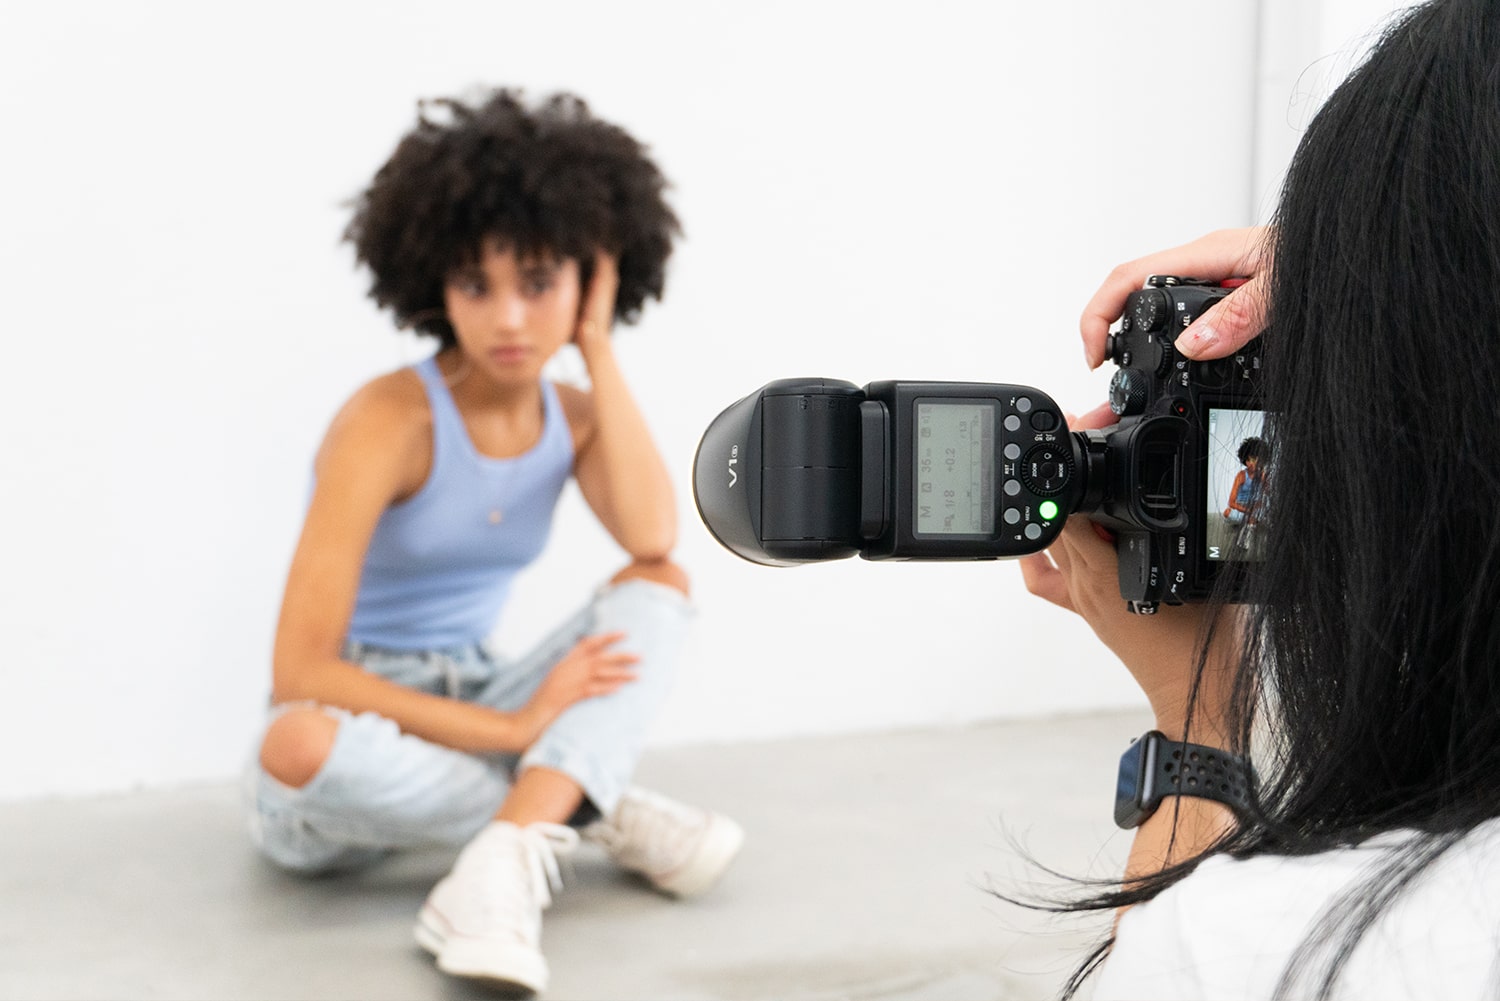 a photographer capturing an image of a curly-haired model who is seated. The main focus of the image is the camera held by the photographer, poised to capture the model's photo.